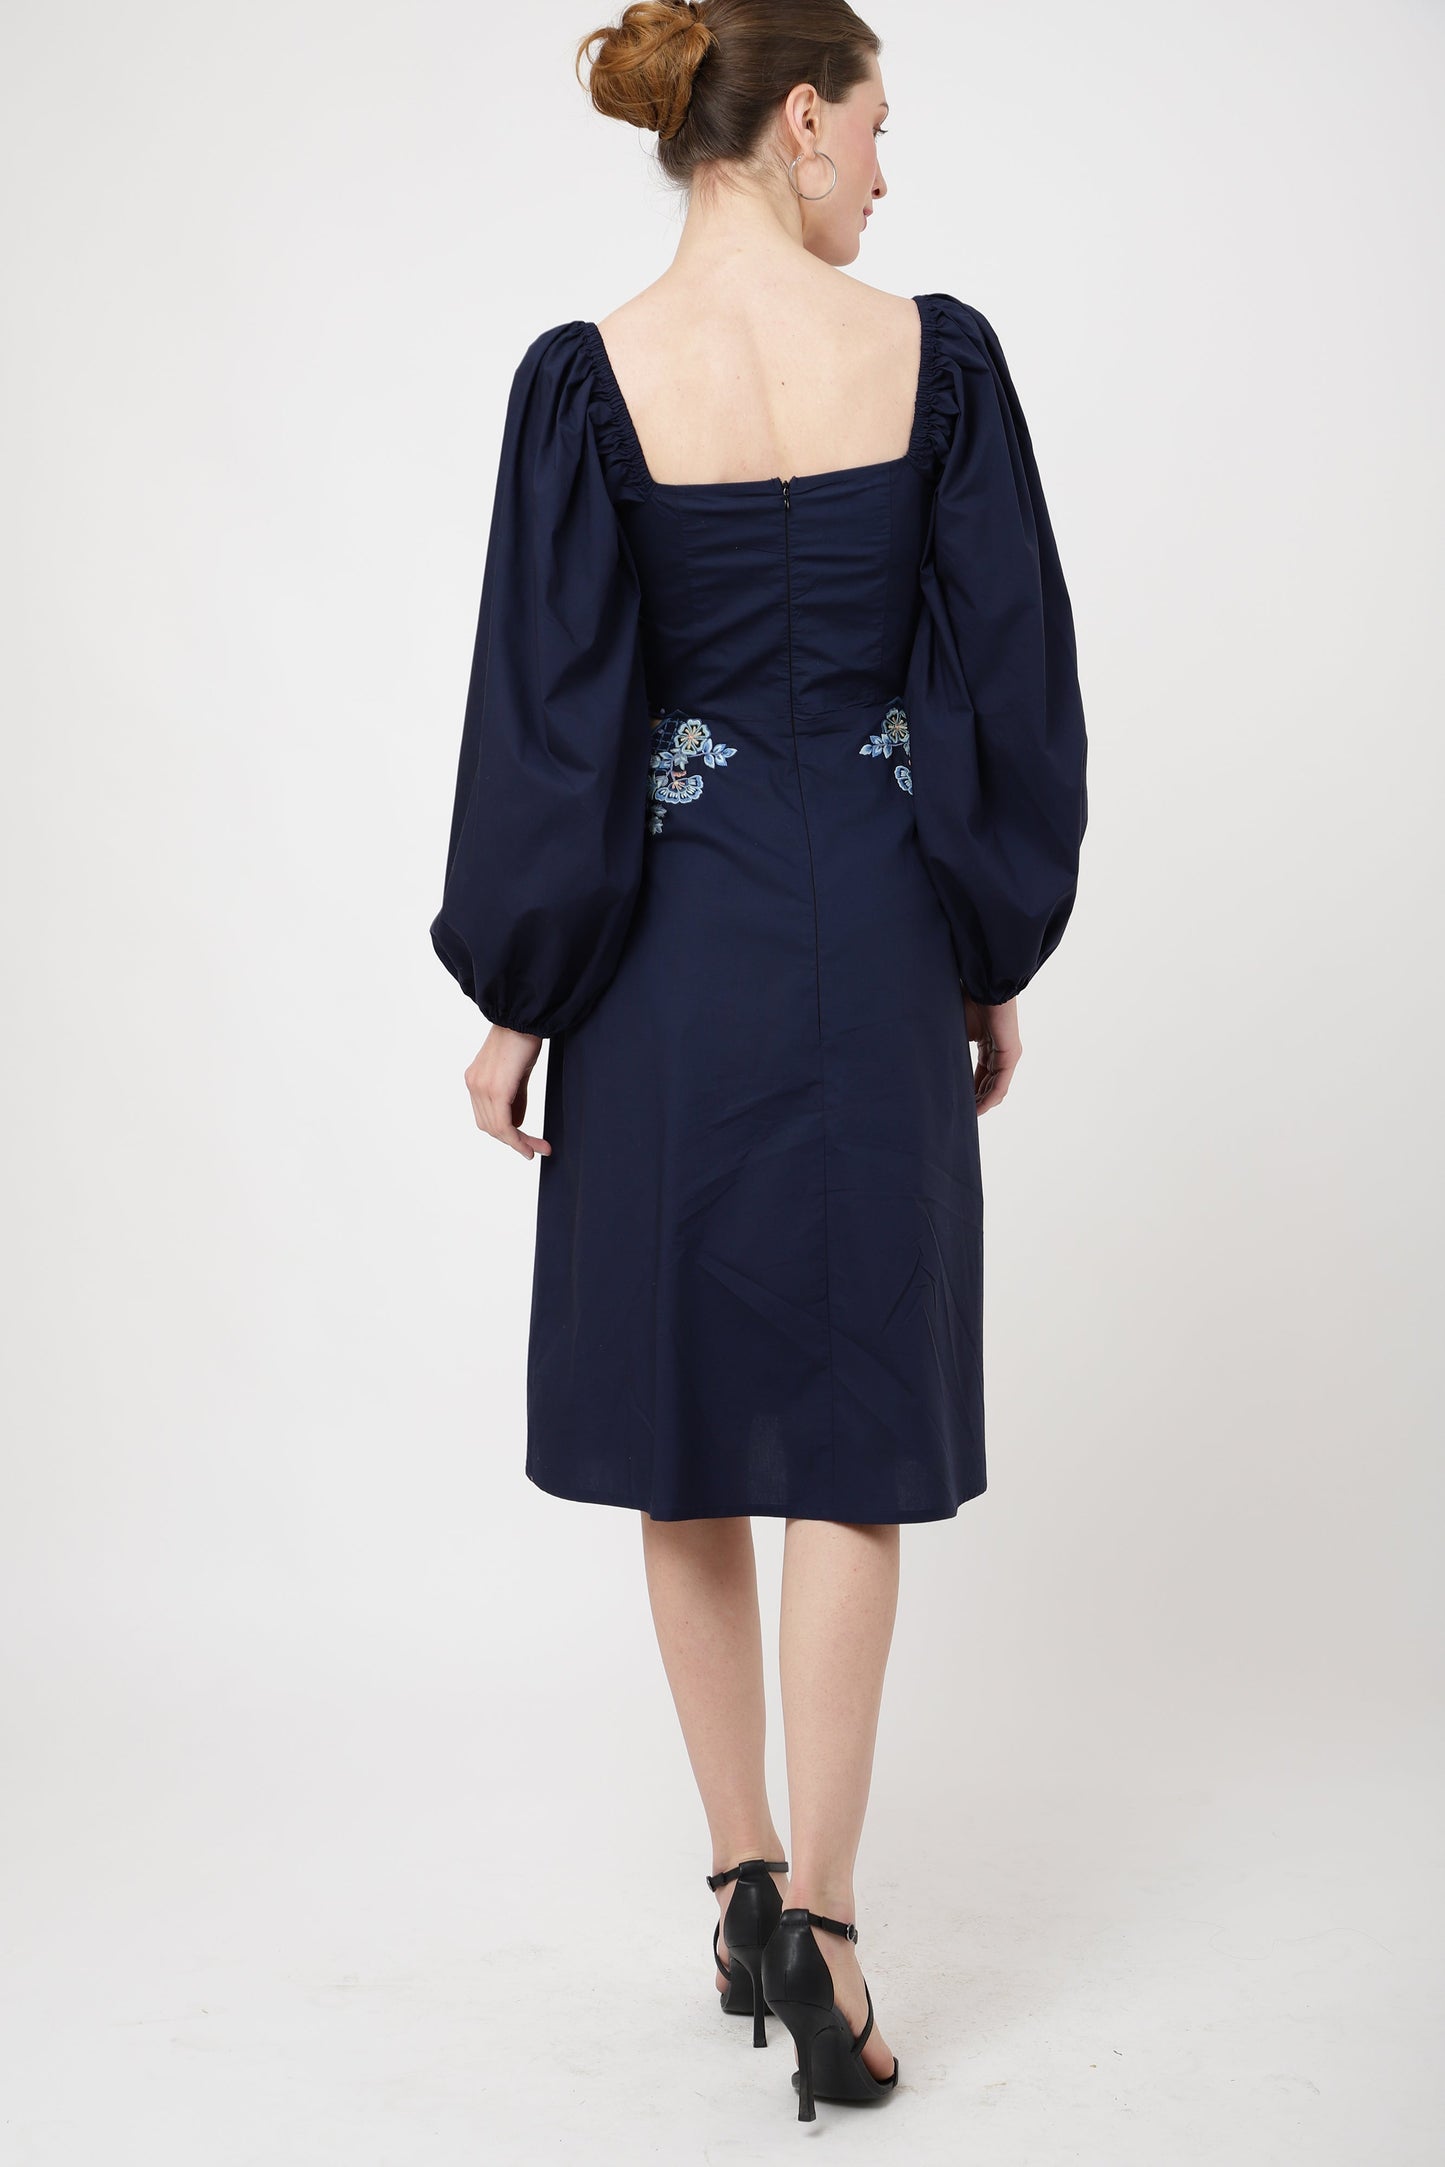 Tonal Embroidered Midnight Blue Casual Midi Dress - S to XL